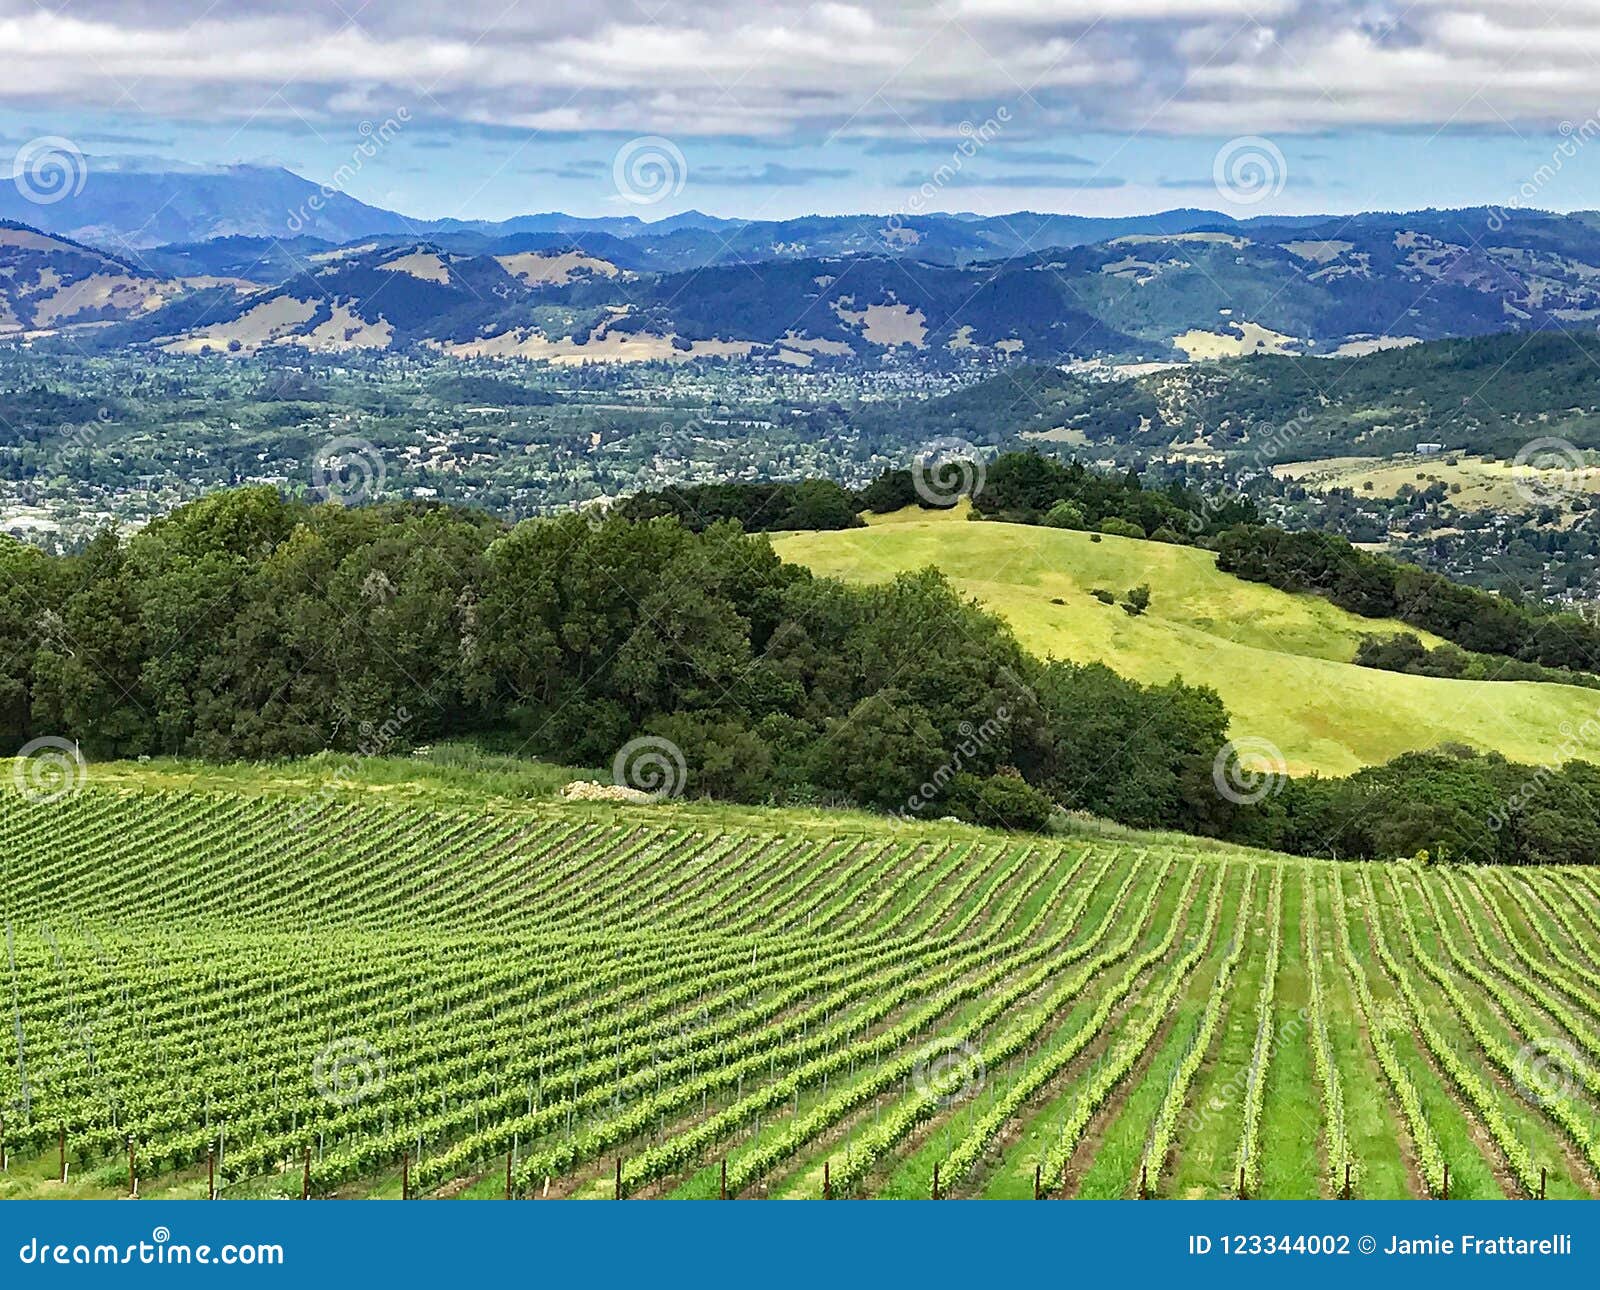 a view over the hills and vineyards of sonoma county, california